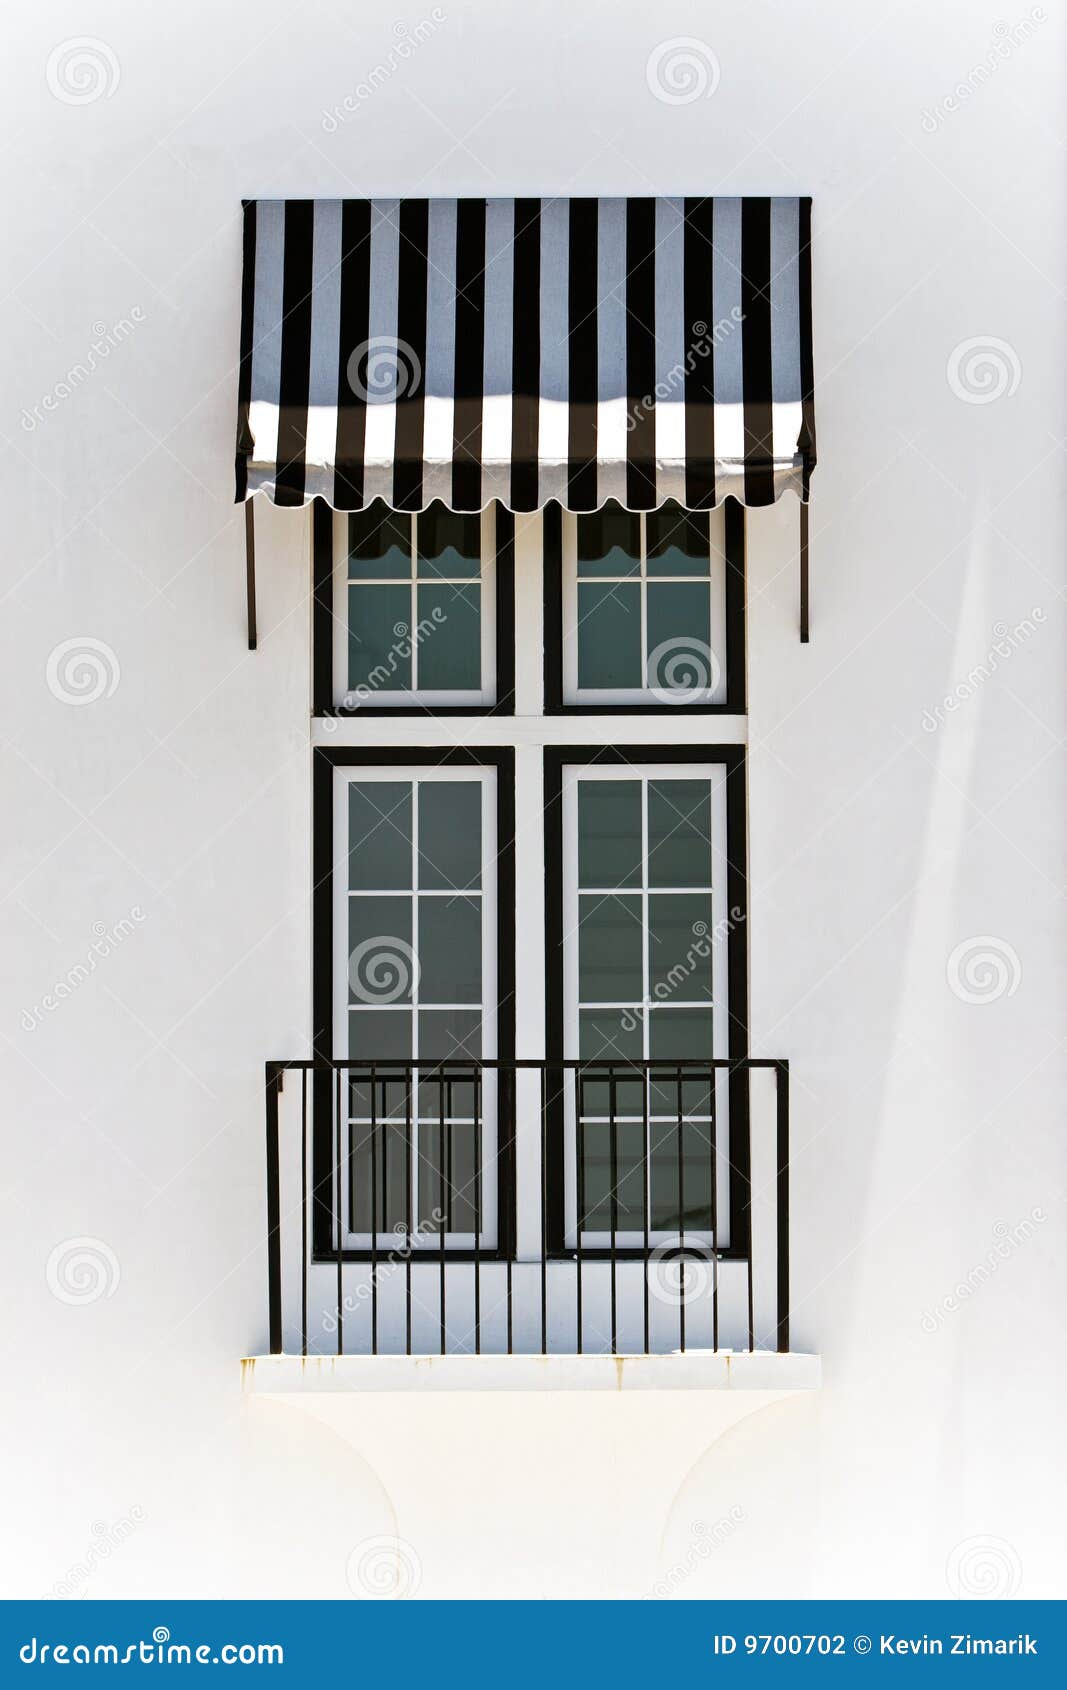 windows with black and white awning